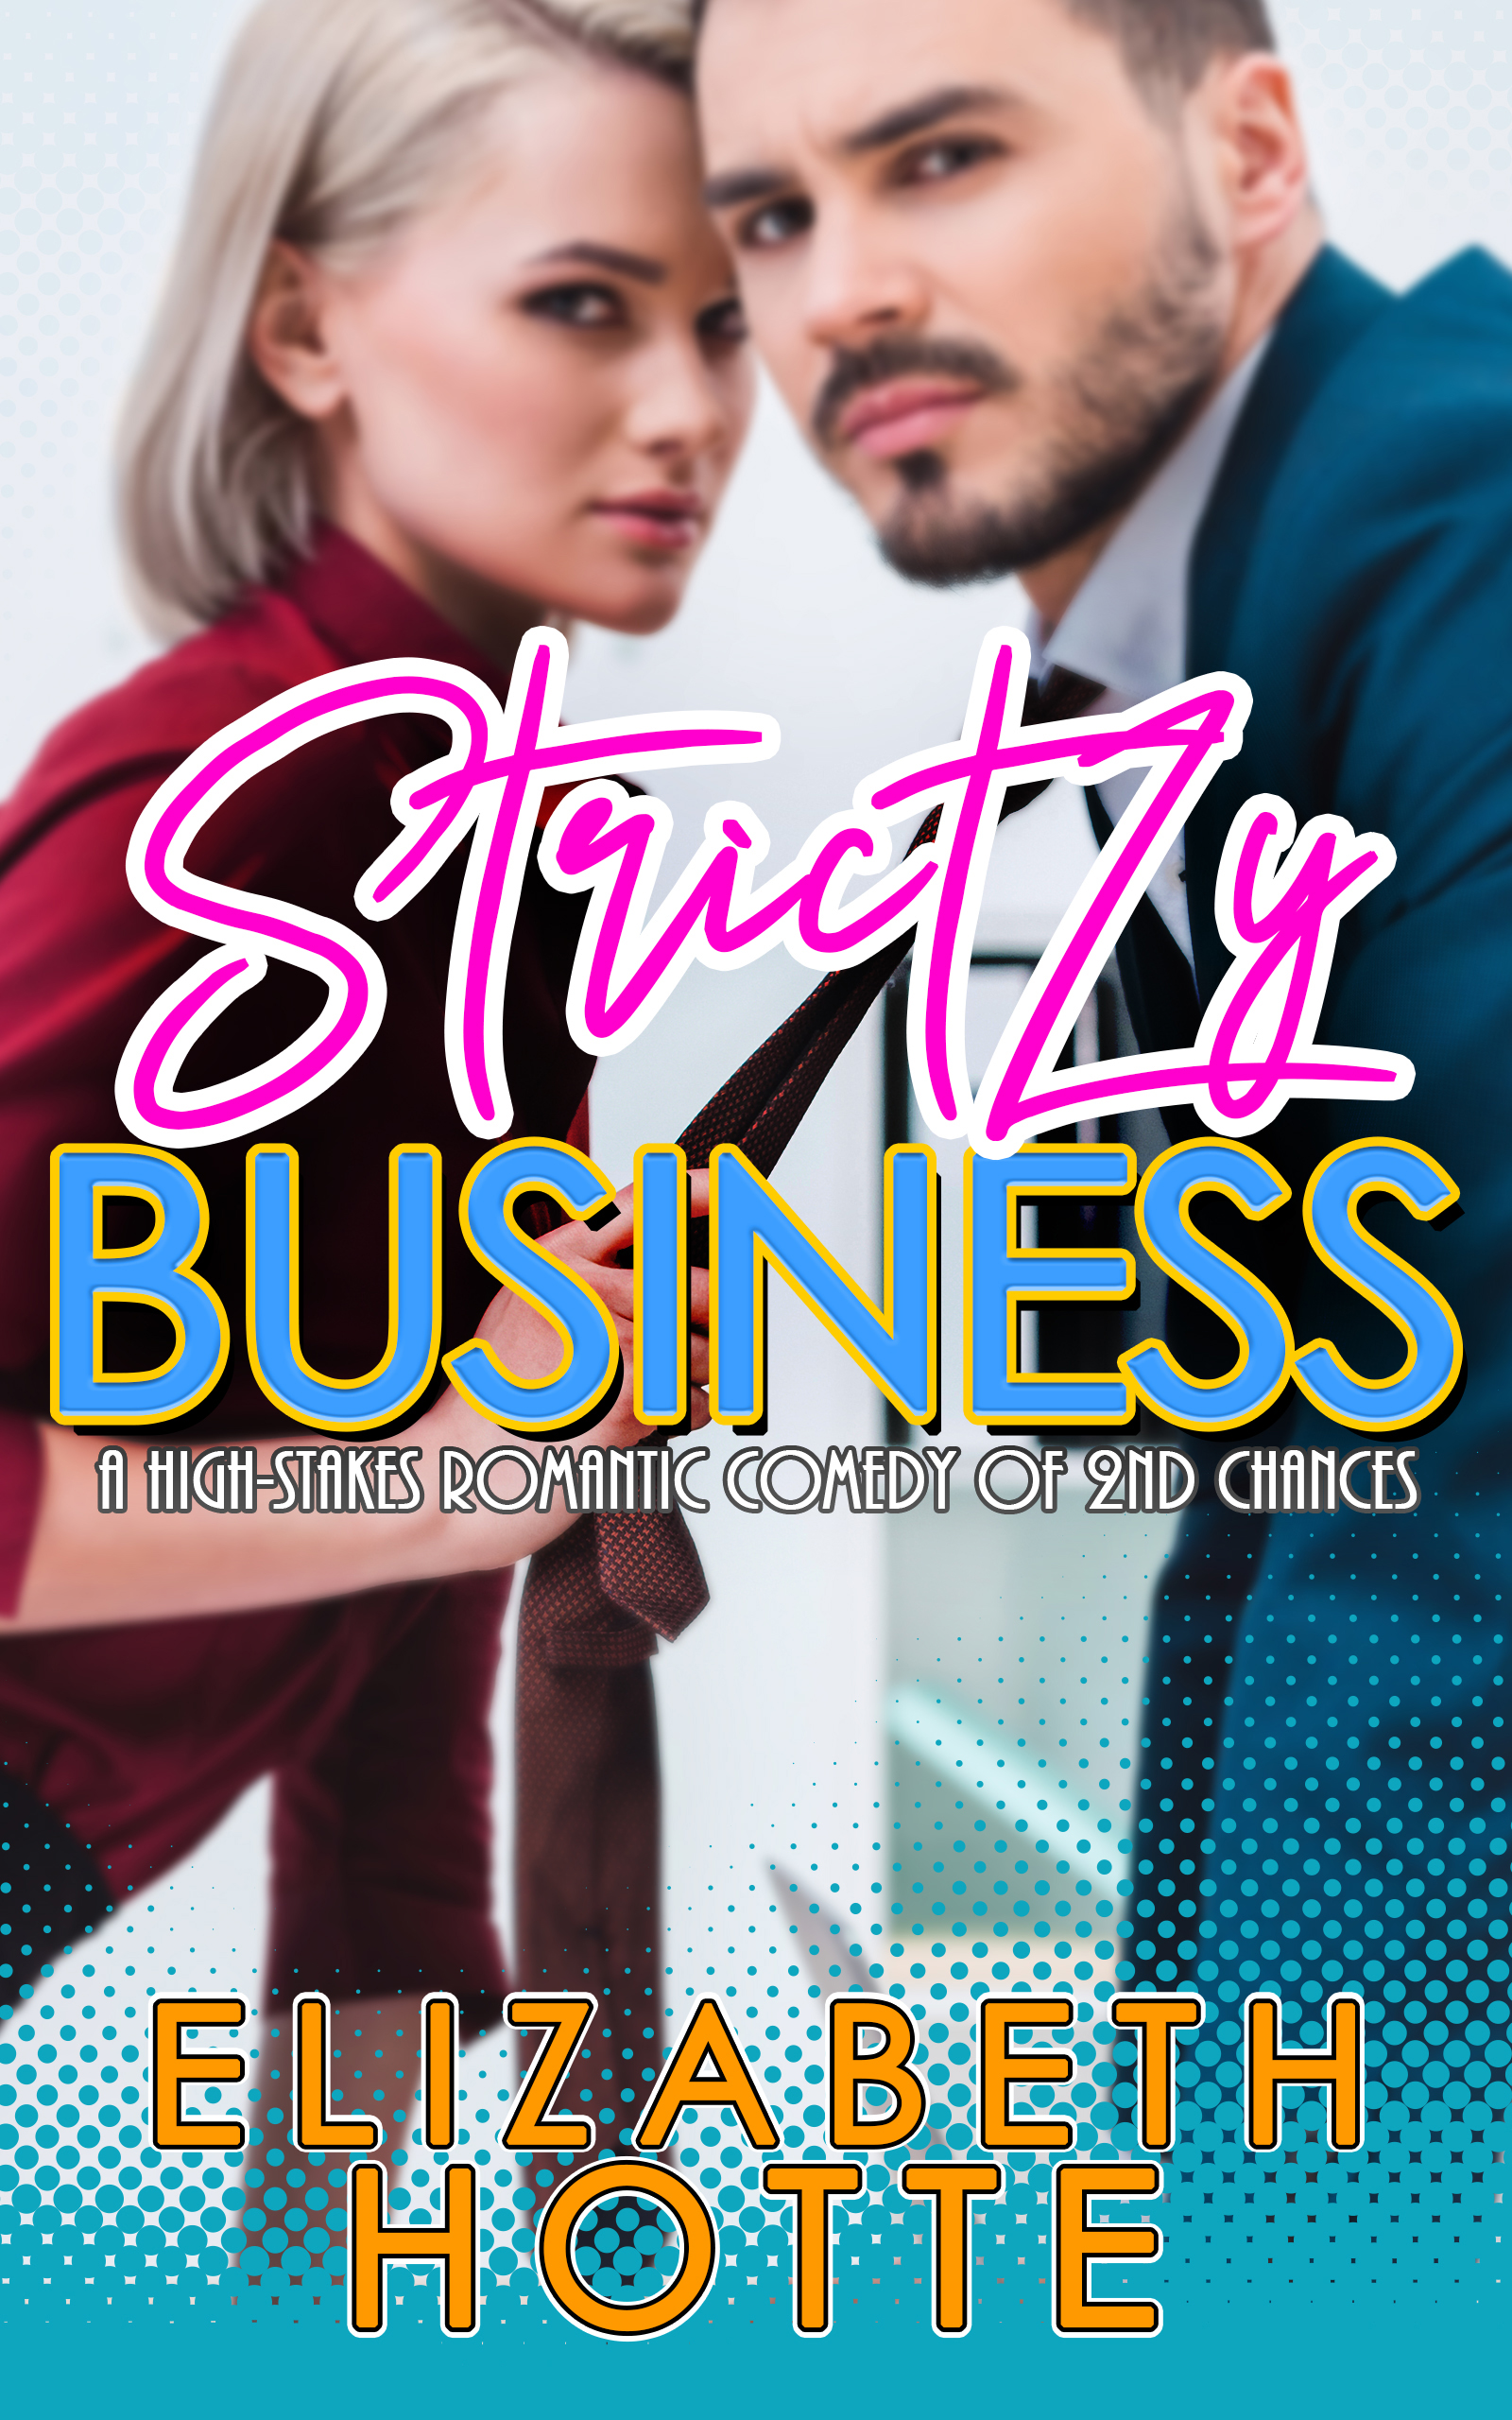 Strictly Business by Author Elizabeth Hotte